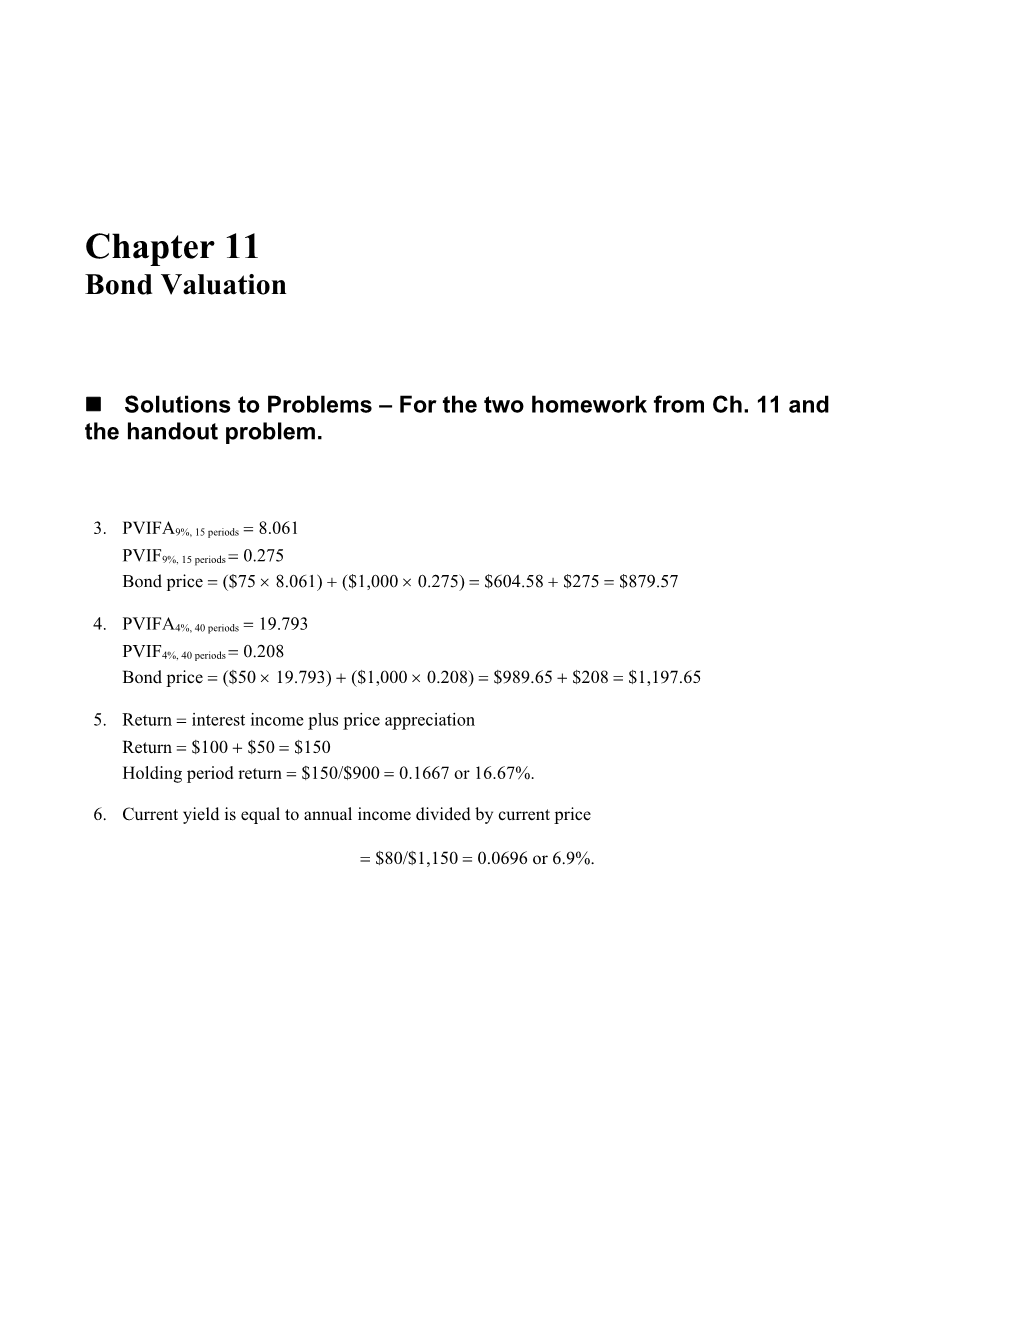 Solutions to Problems for the Two Homework from Ch. 11 and the Handout Problem